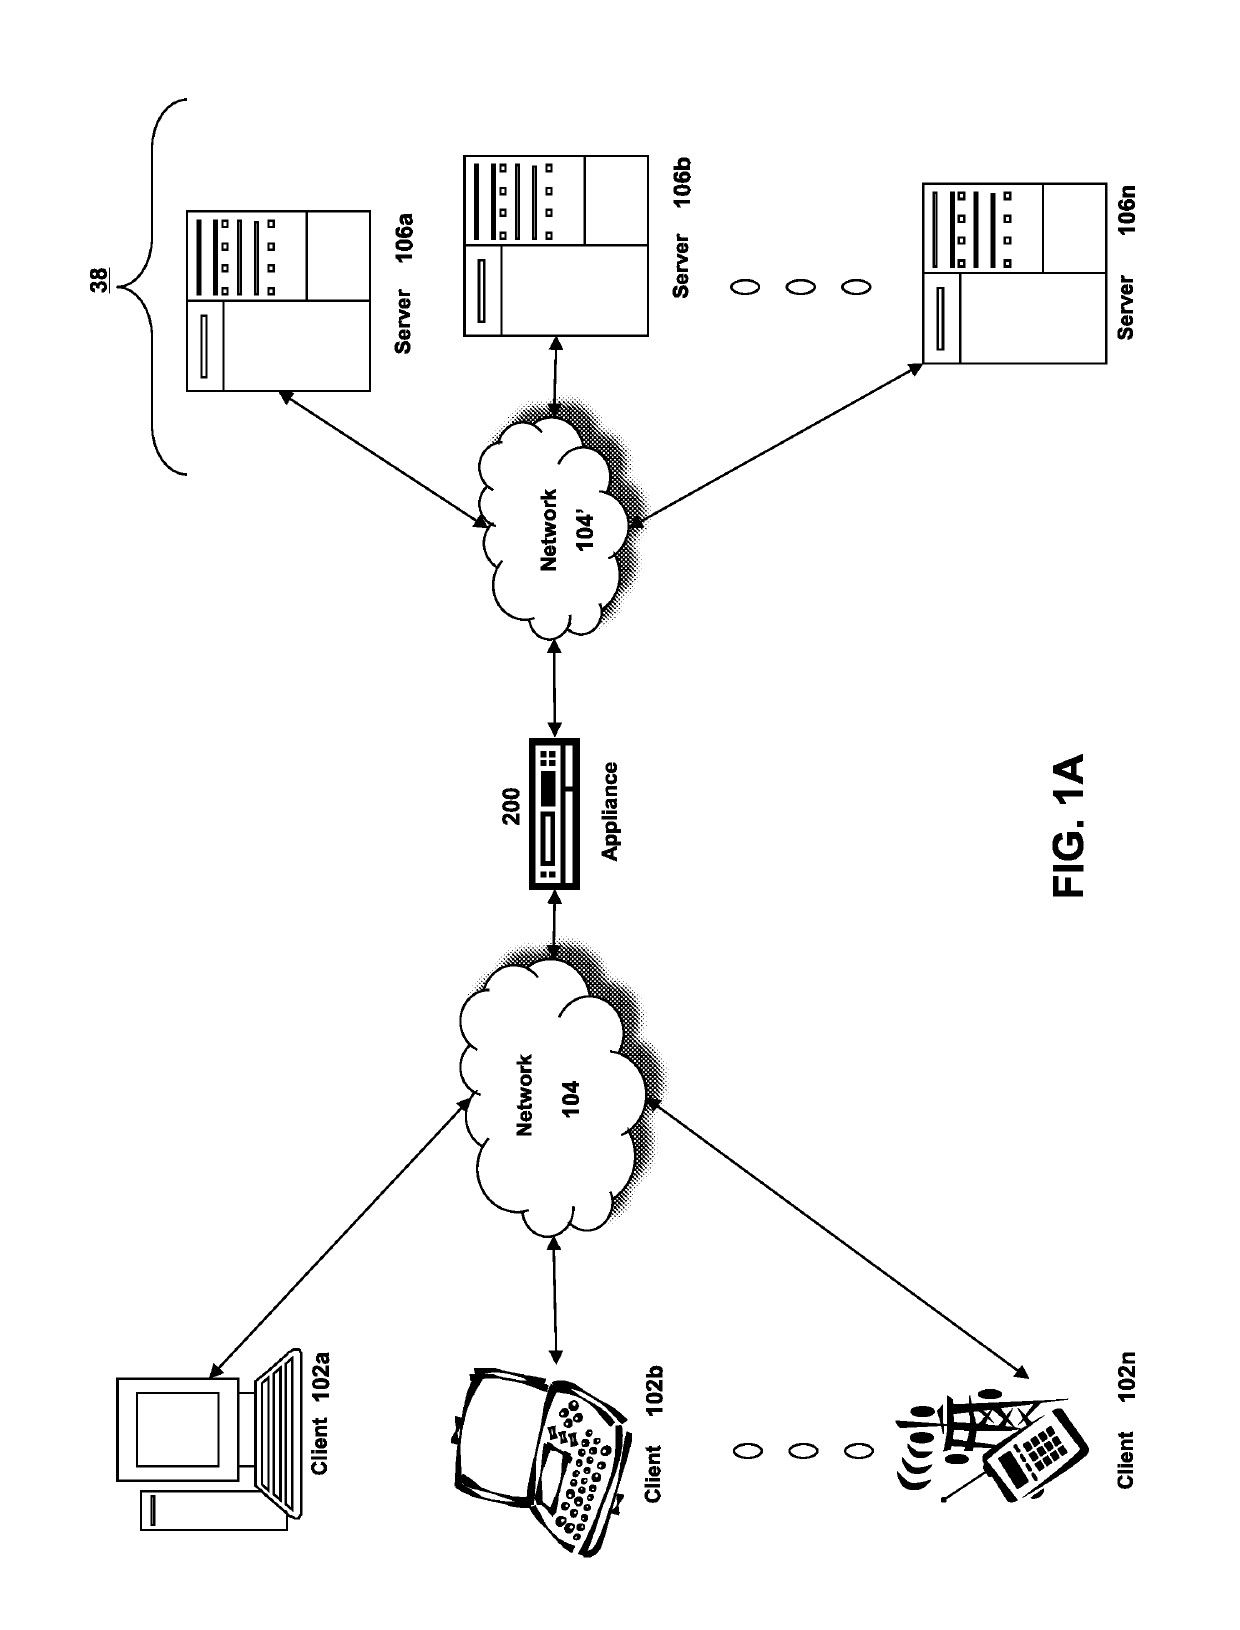 Combining internet routing information with access logs to assess risk of user exposure